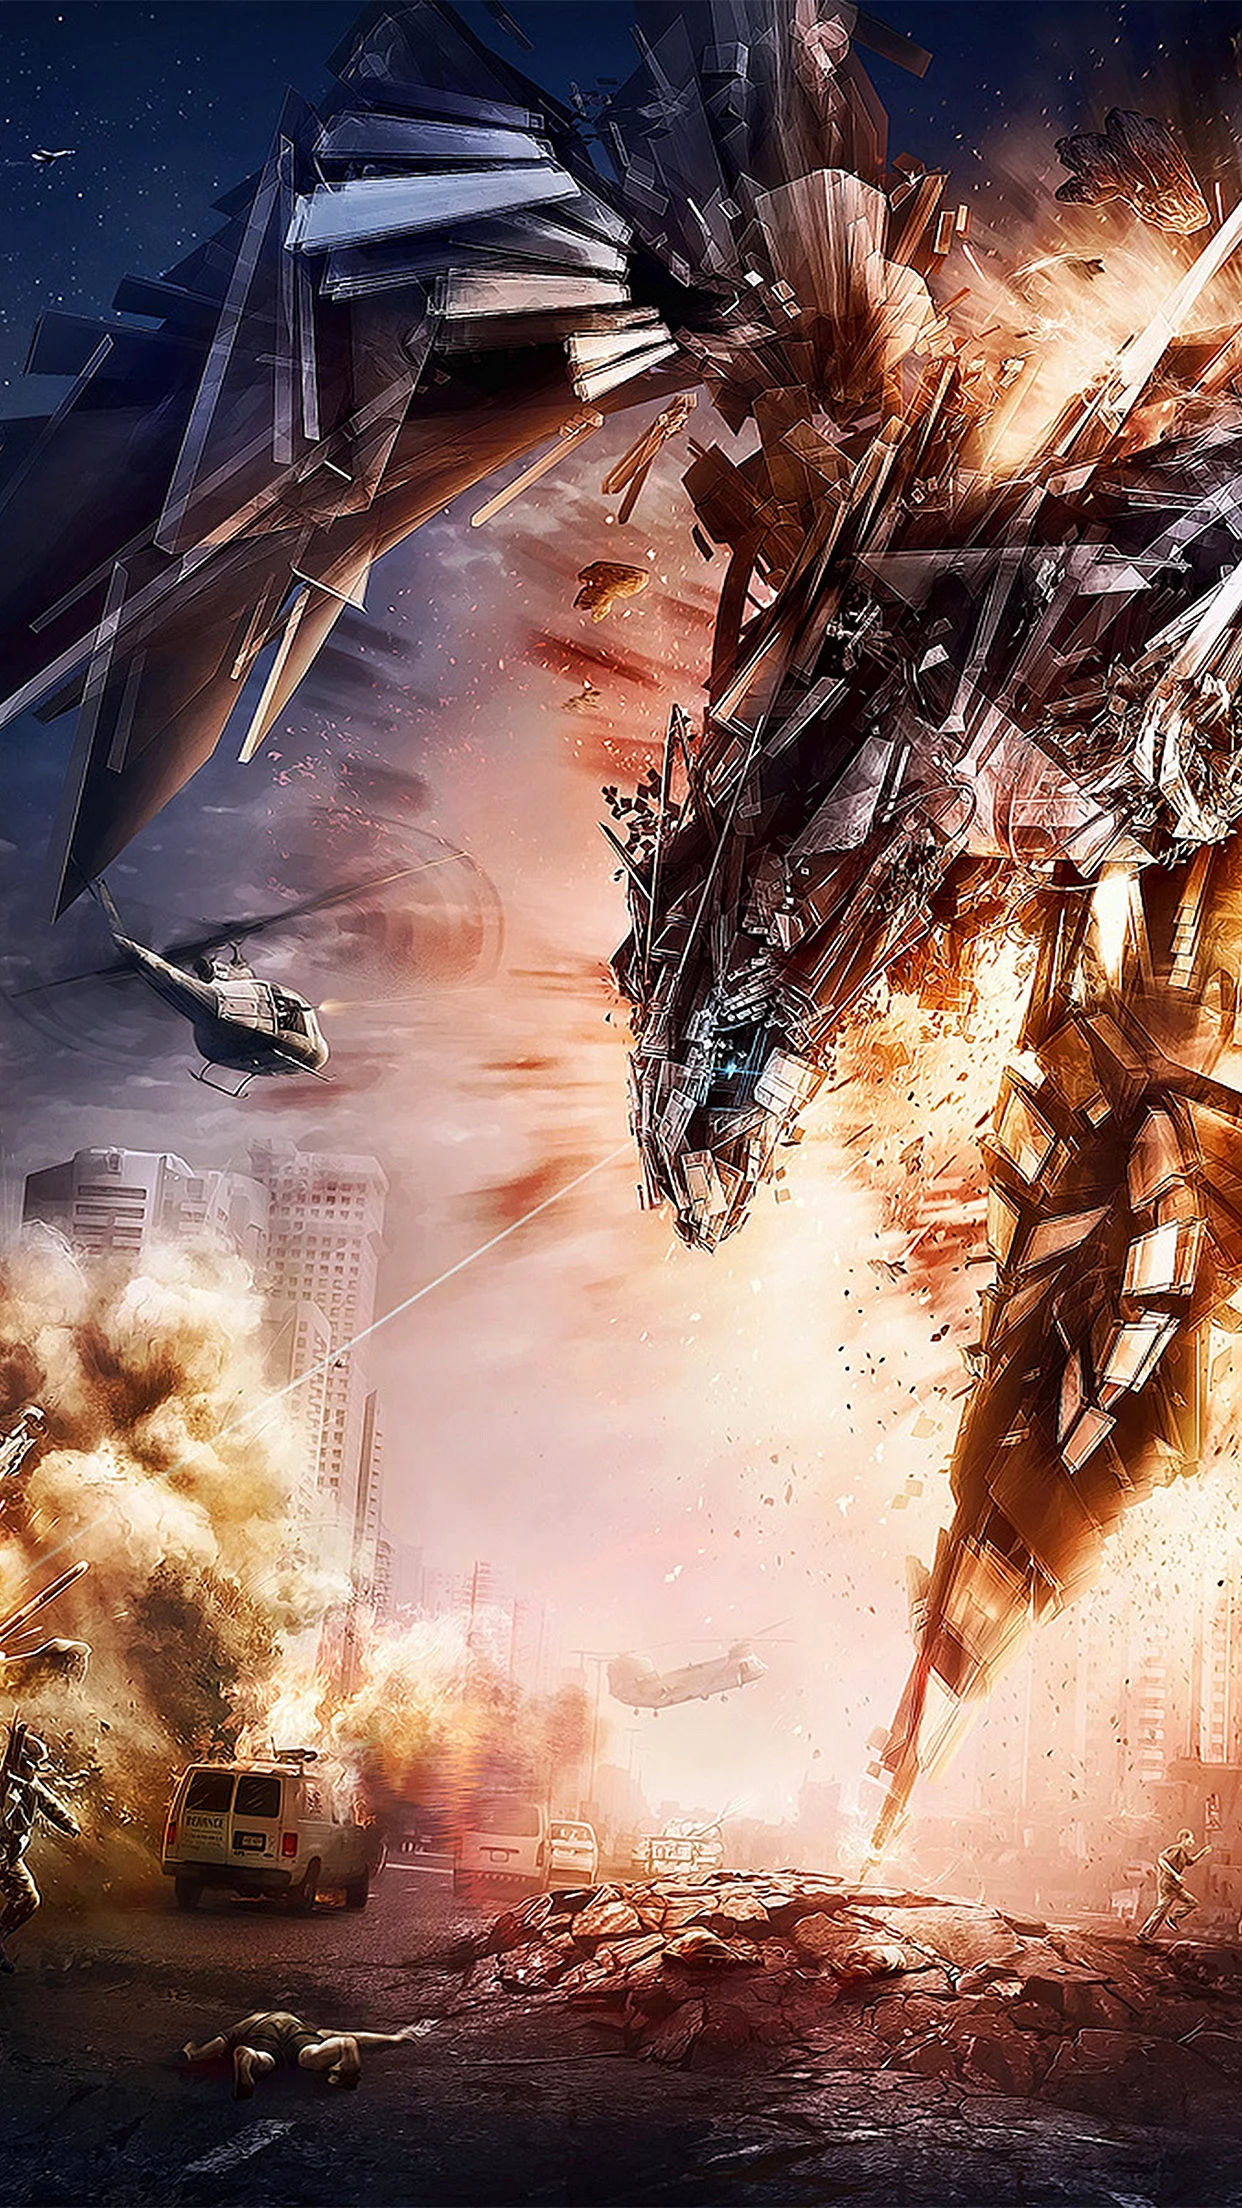 Transformers 4 Wallpaper For iPhone